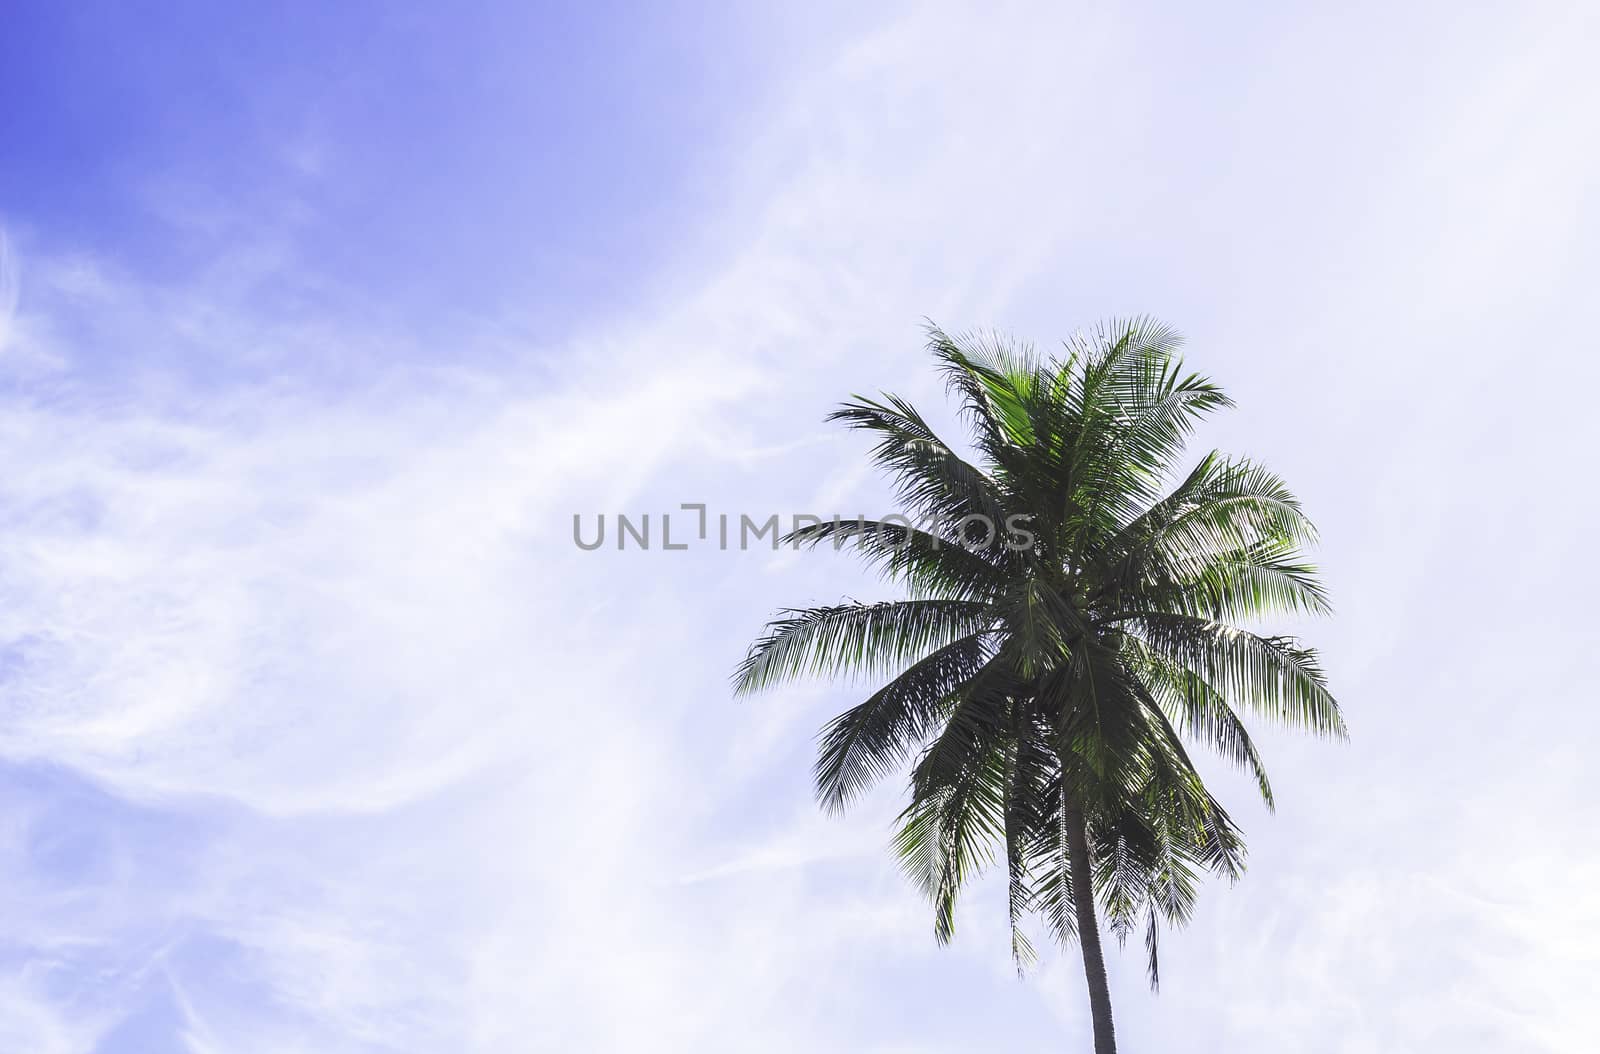 Coconut tree with blue sky and fluffy clouds